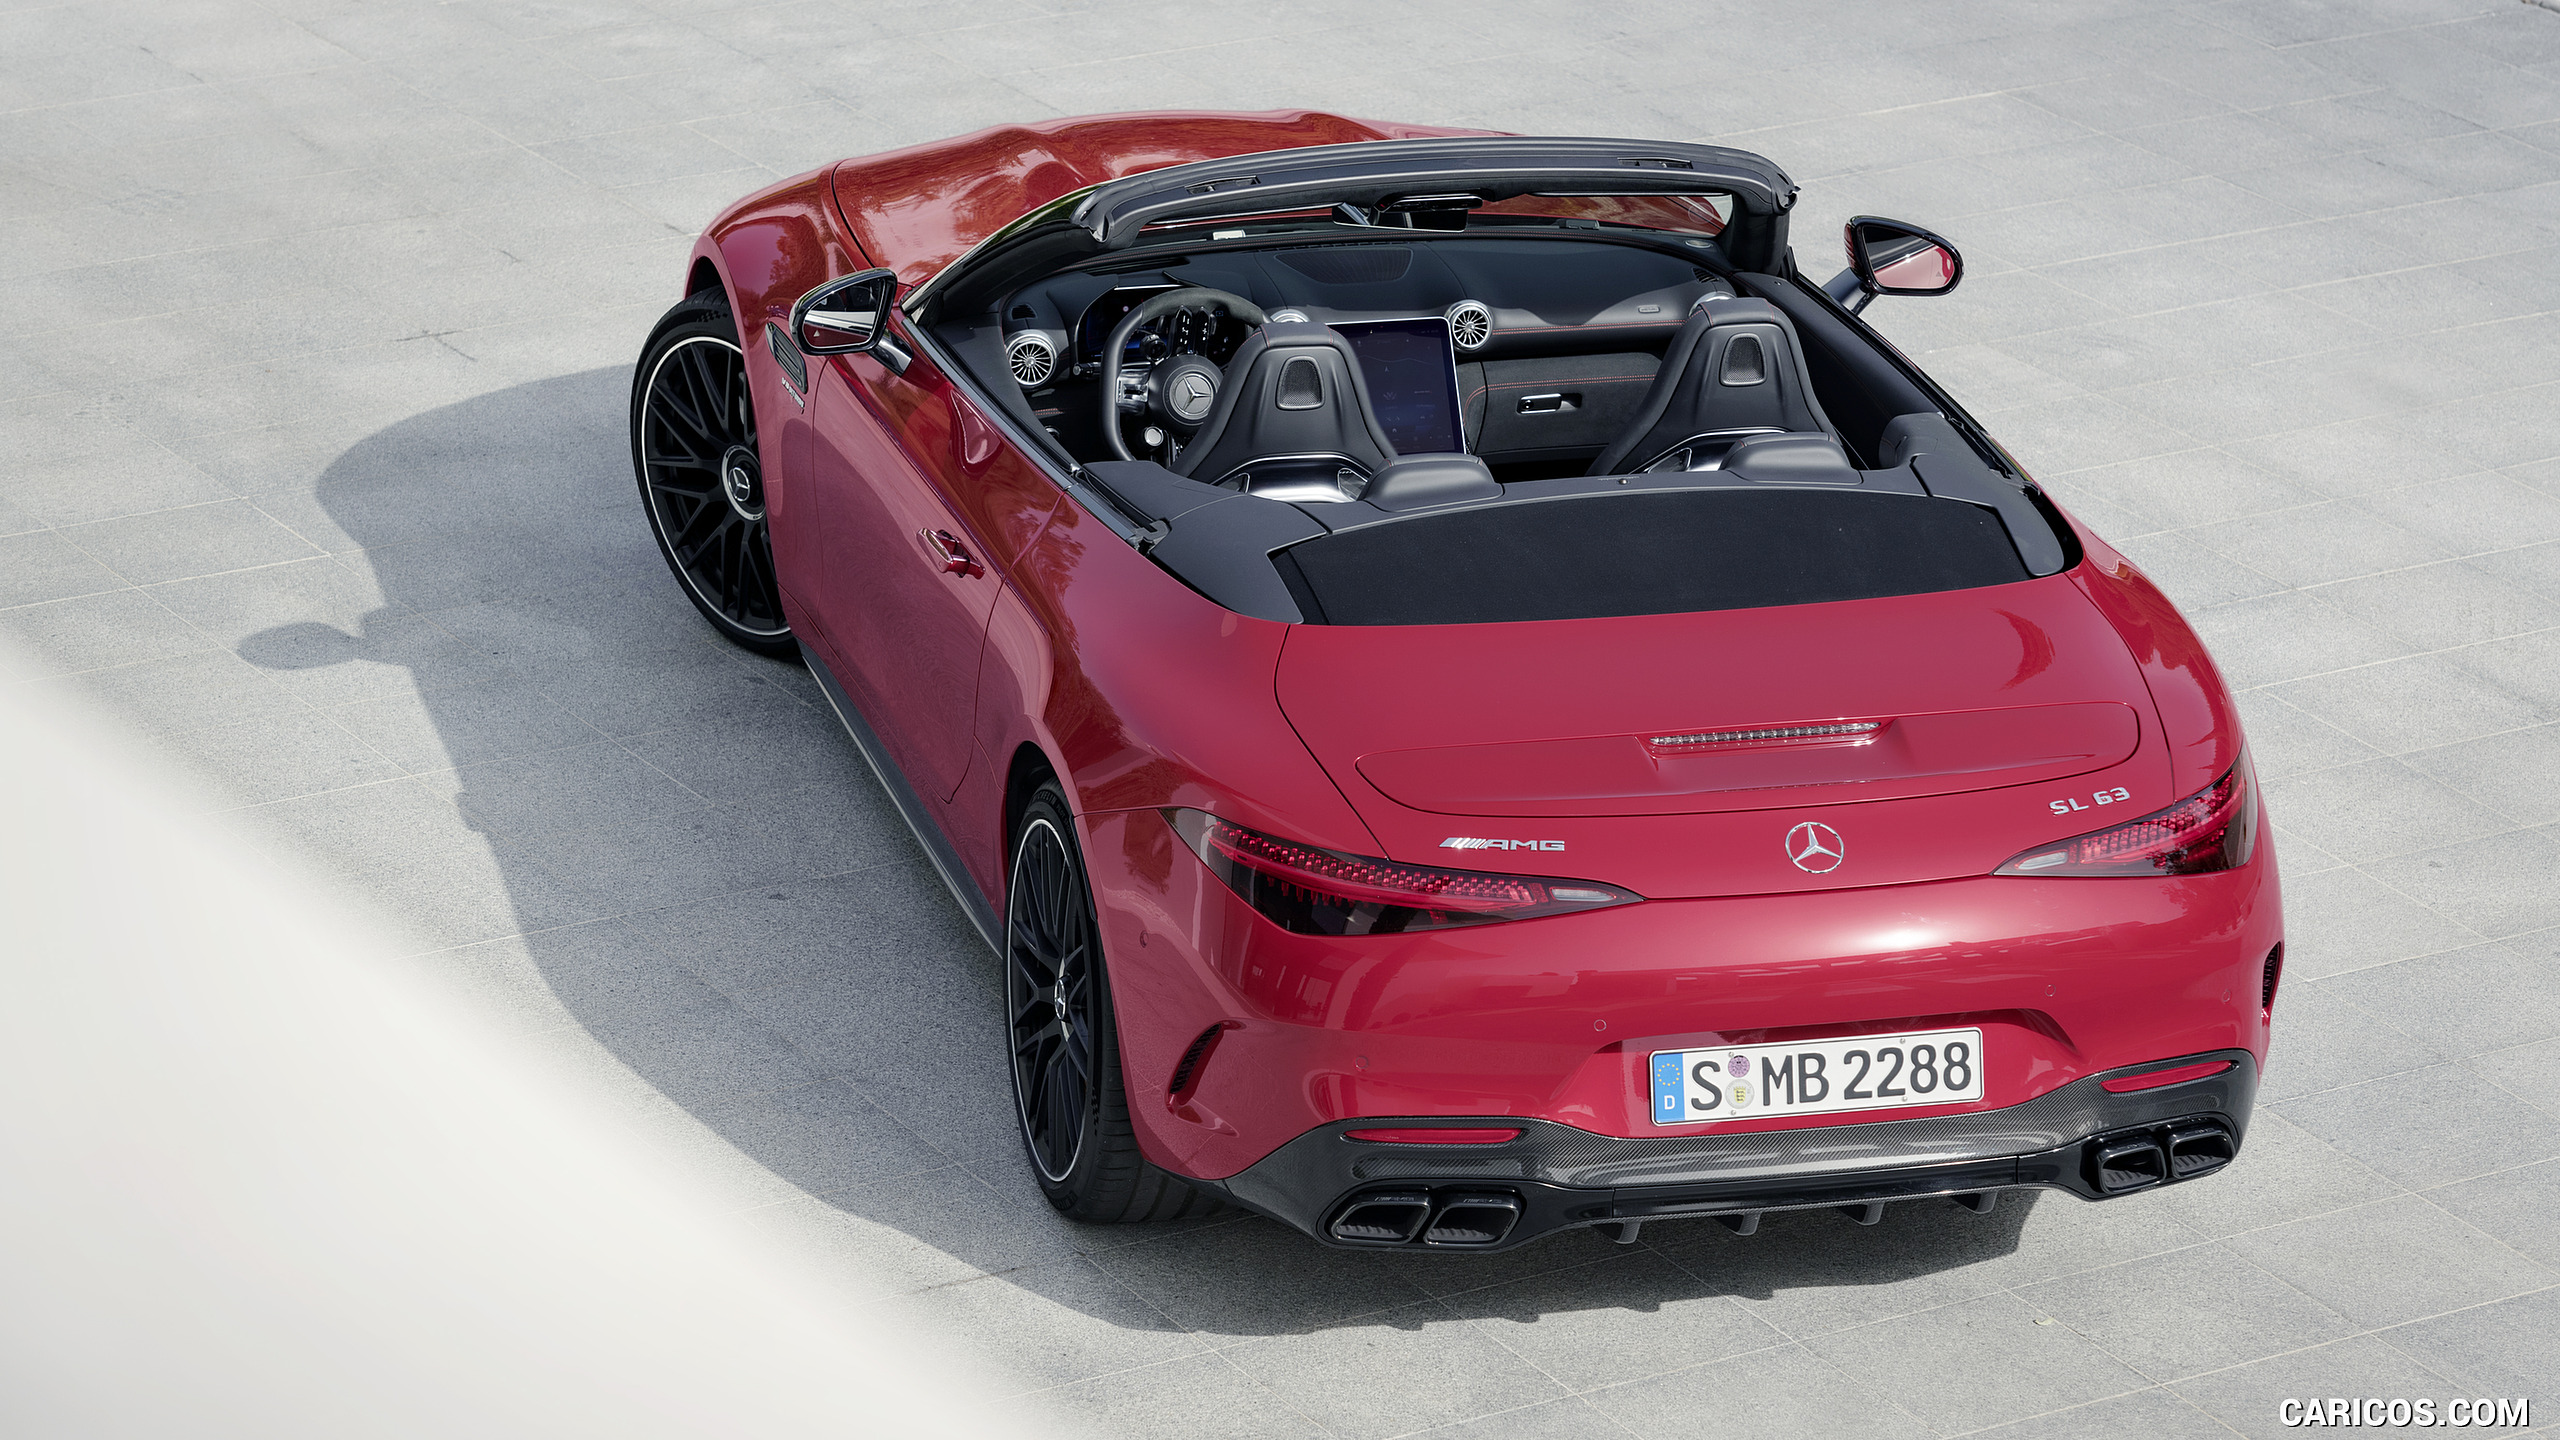 2022 Mercedes-AMG SL 63 4MATIC+ (Color: Patagonia Red Metallic) - Top, #19 of 235